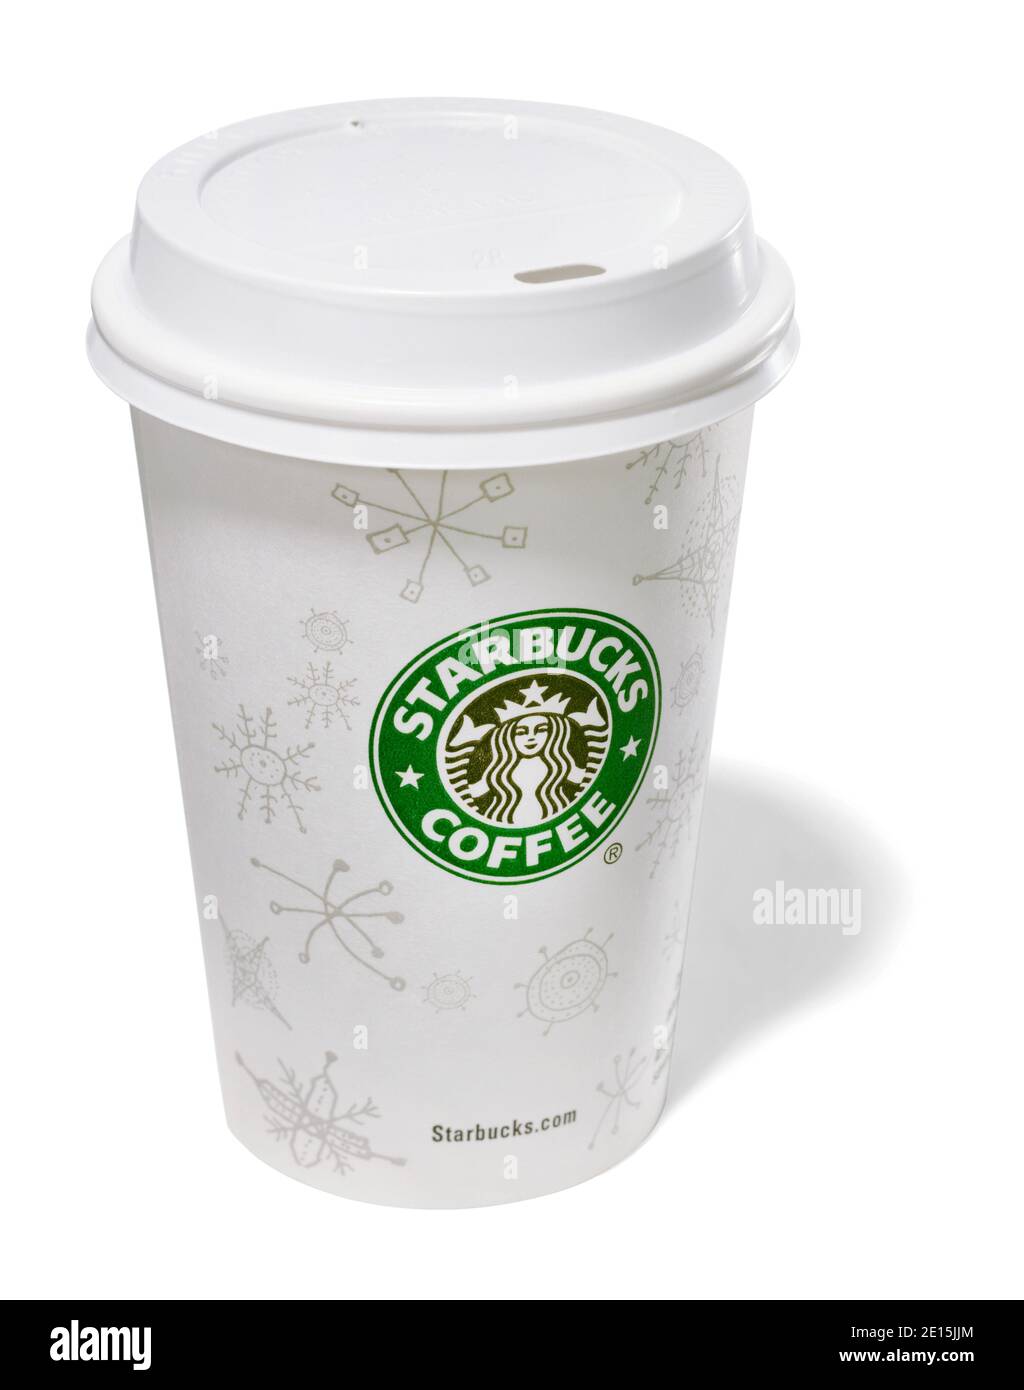 https://c8.alamy.com/comp/2E15JJM/starbucks-white-holiday-coffee-cup-with-lid-photographed-on-a-white-background-2E15JJM.jpg